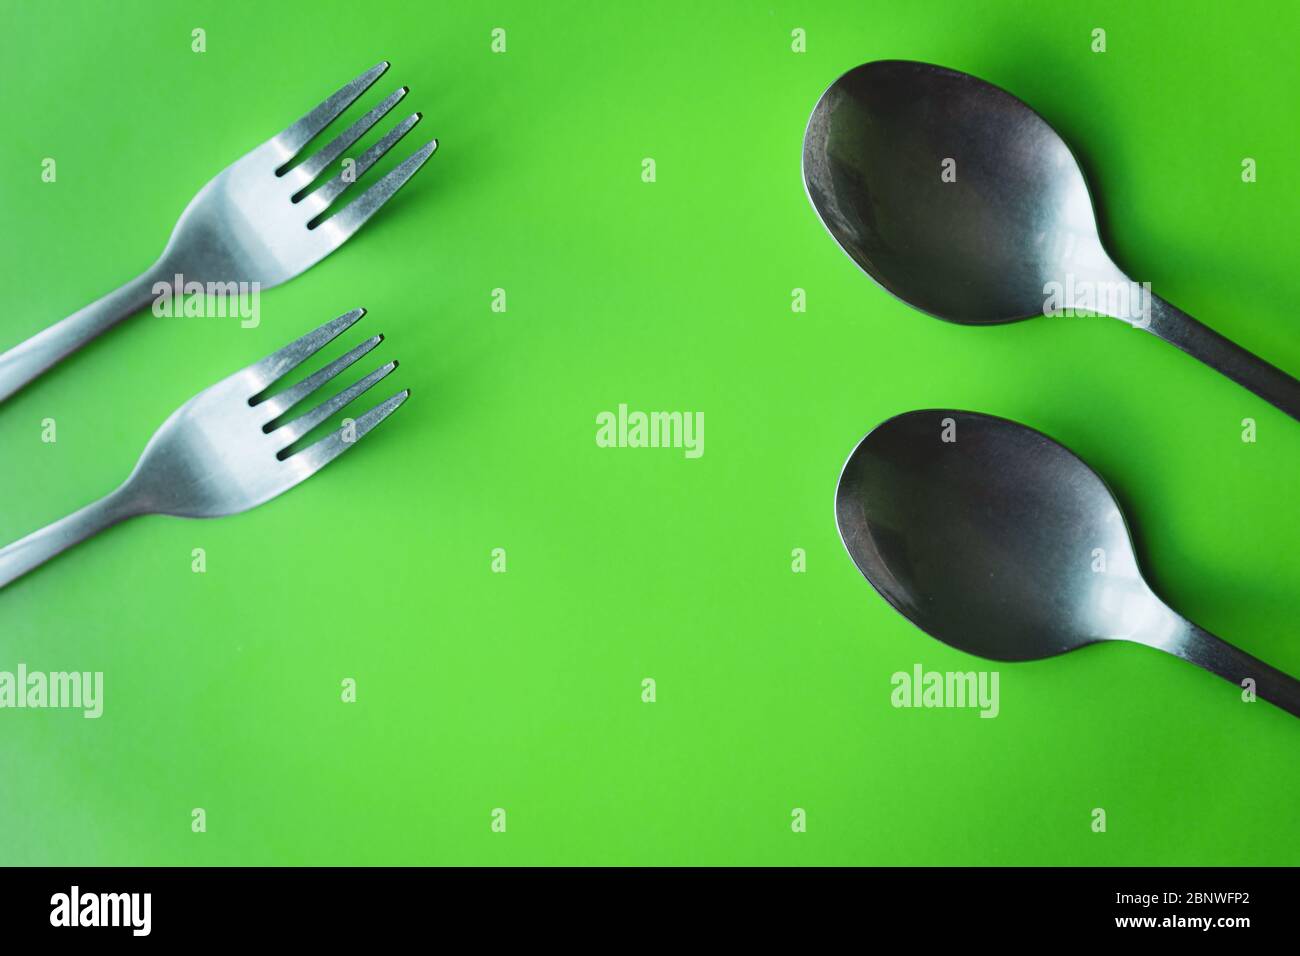 Metal forks and spoons cutlery on green background flat lay Stock Photo